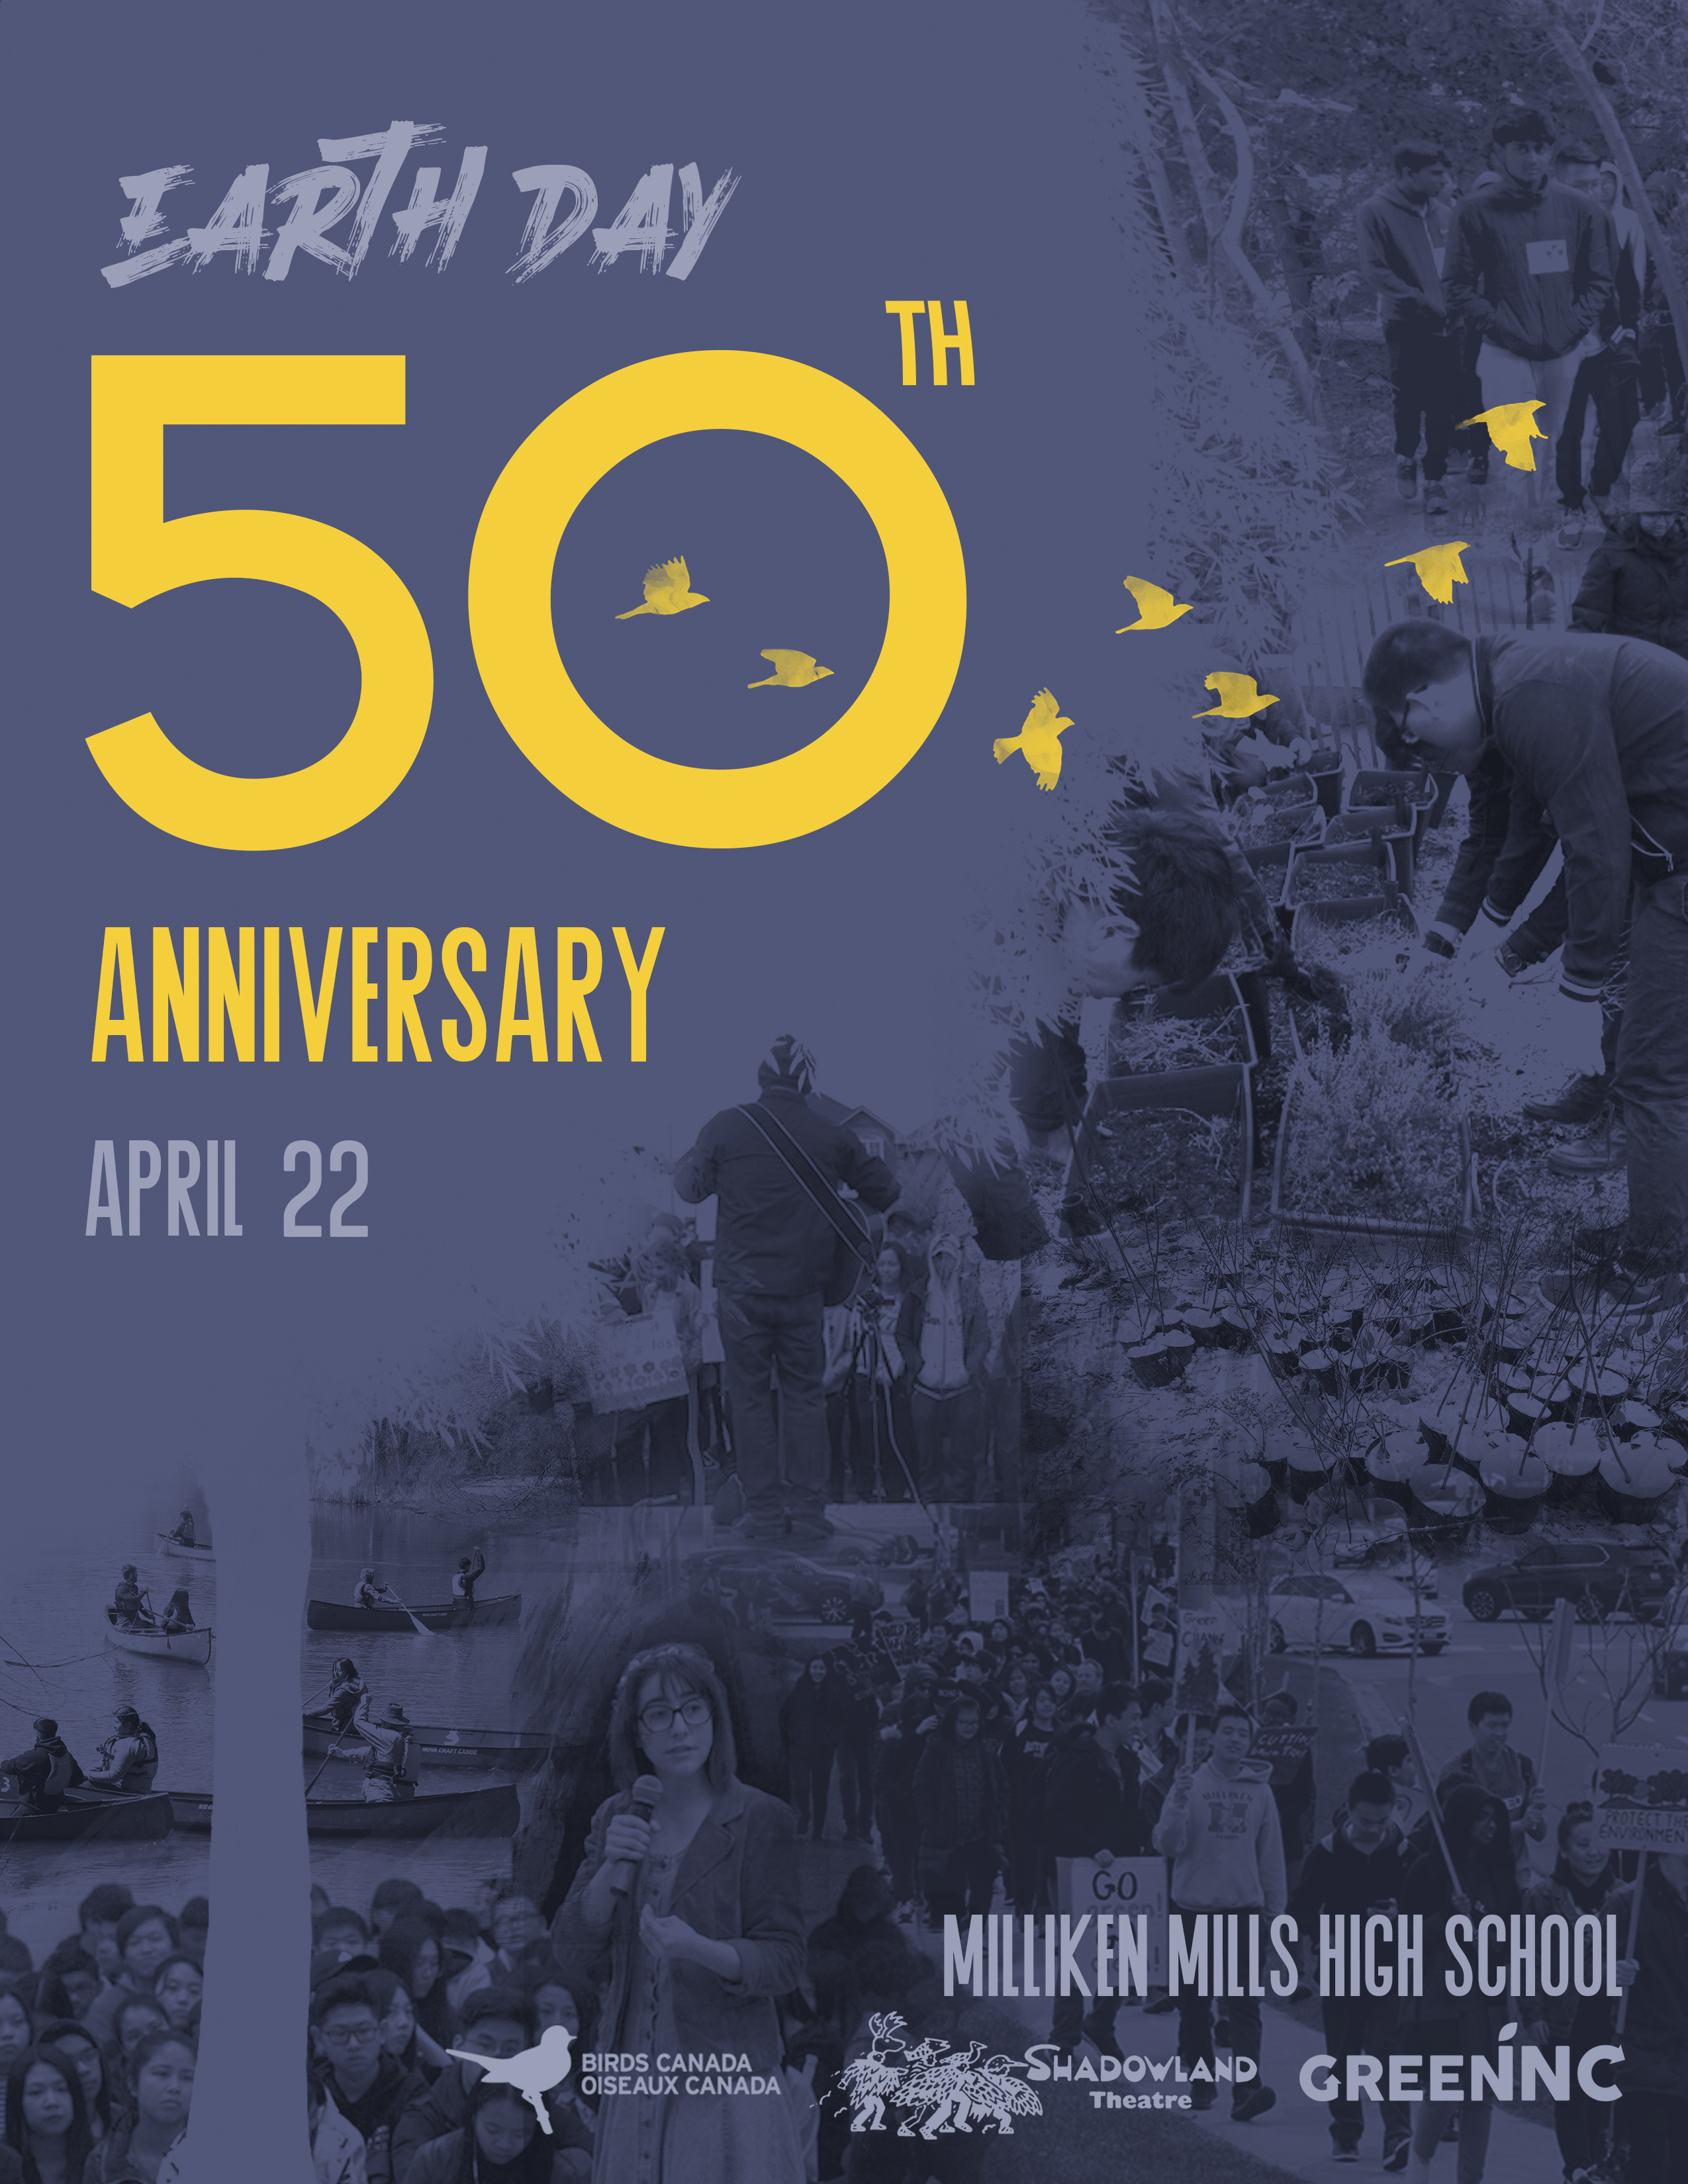 earth day 50th poster gray.jpg